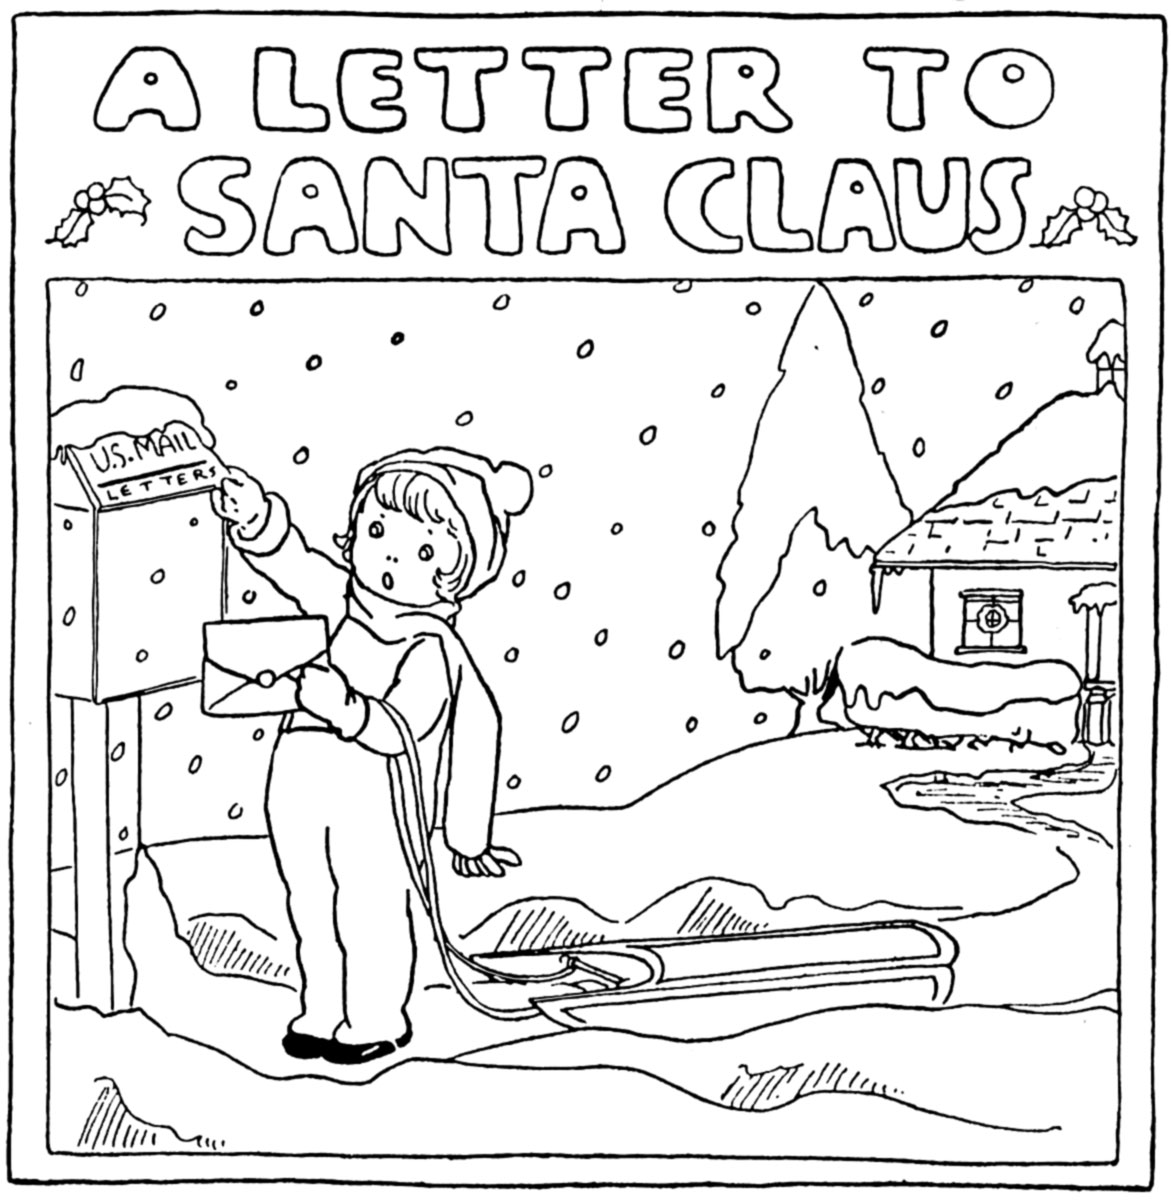 Letter-to-Santa-Claus